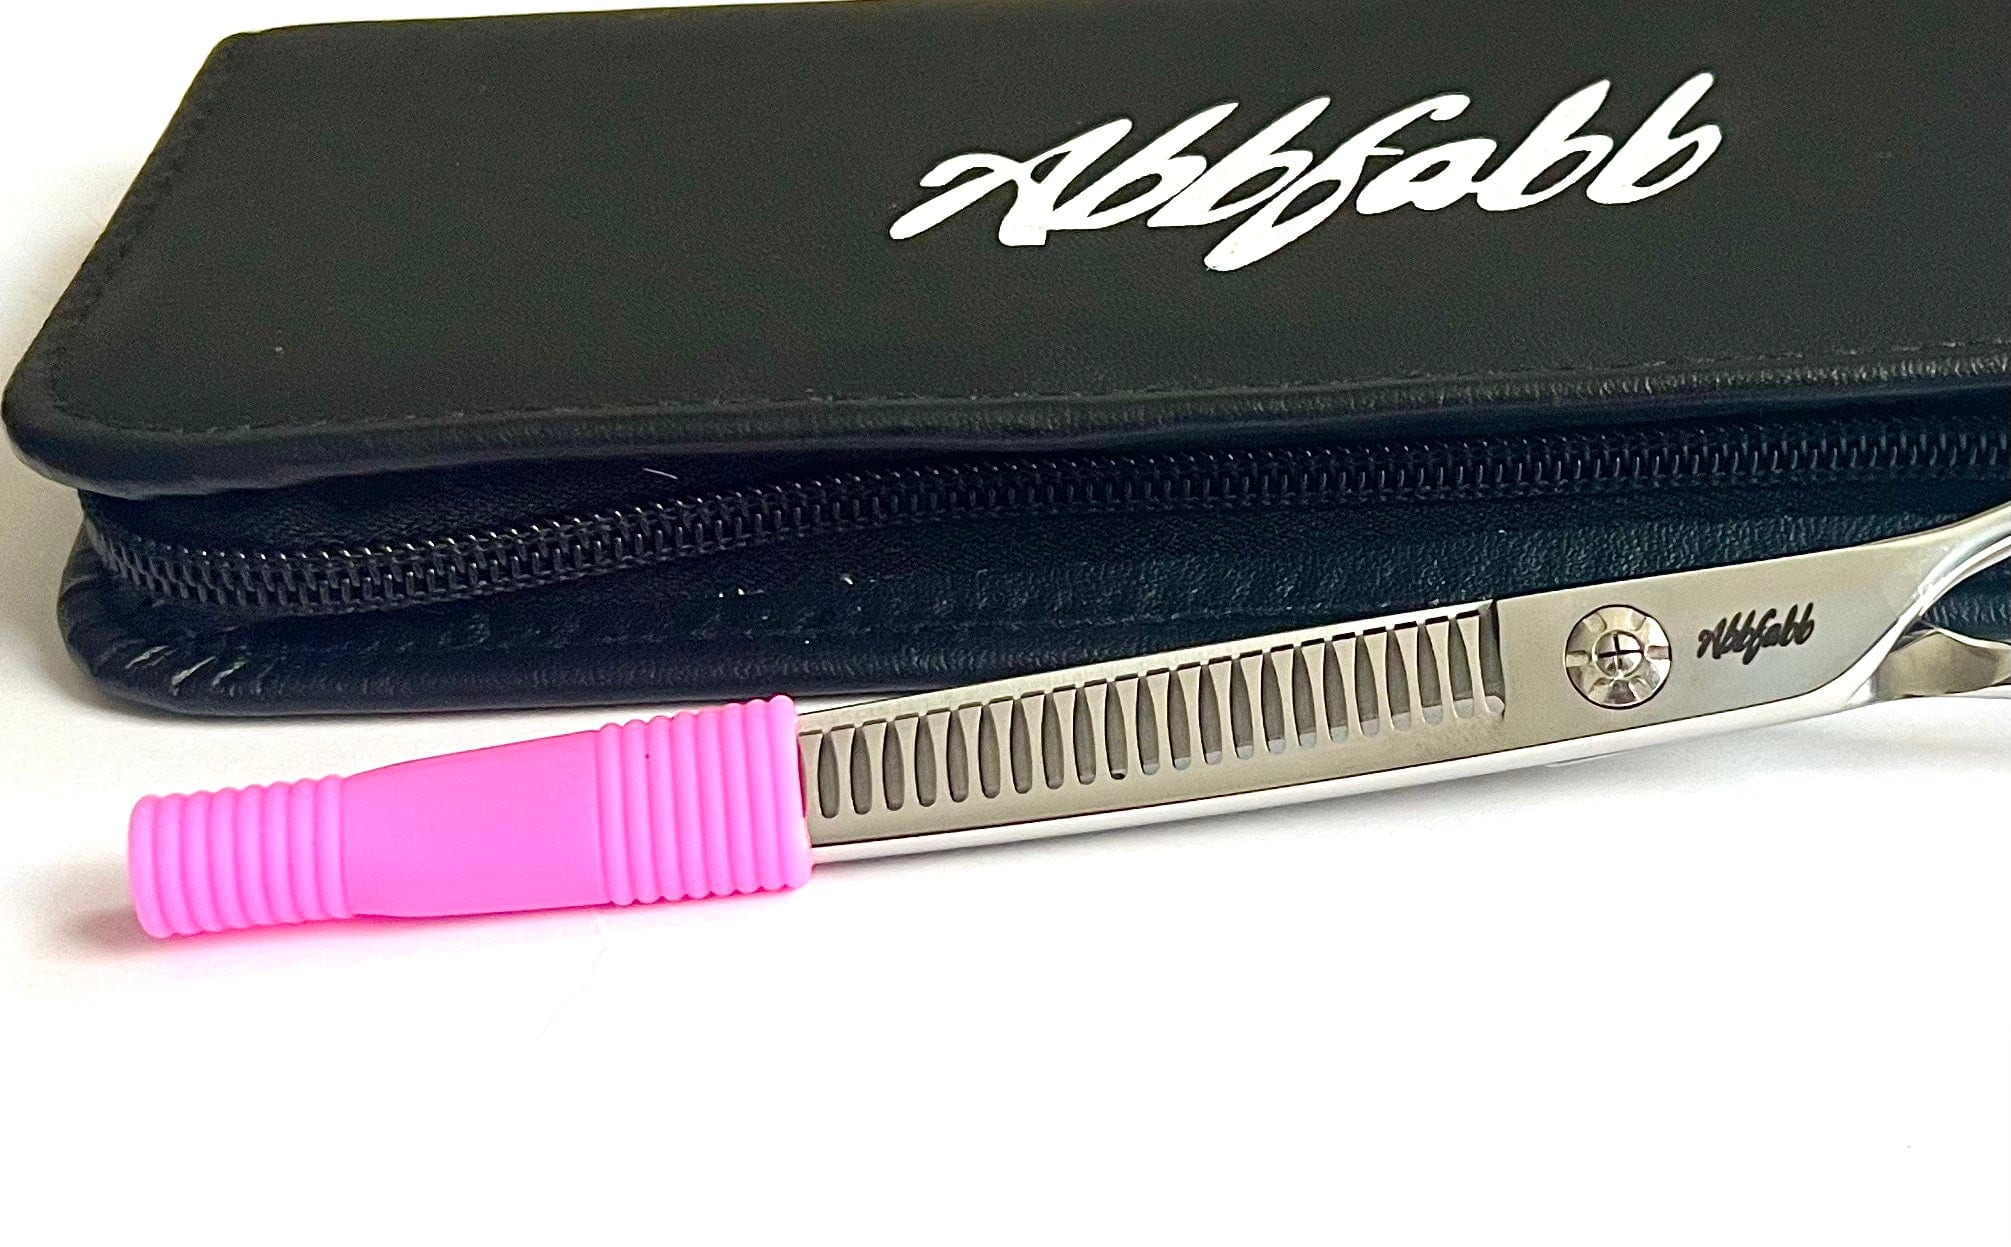 Dog Grooming Scissor Blade and Tip Protector in hot pink by Abbfabb Grooming Scissors Ltd